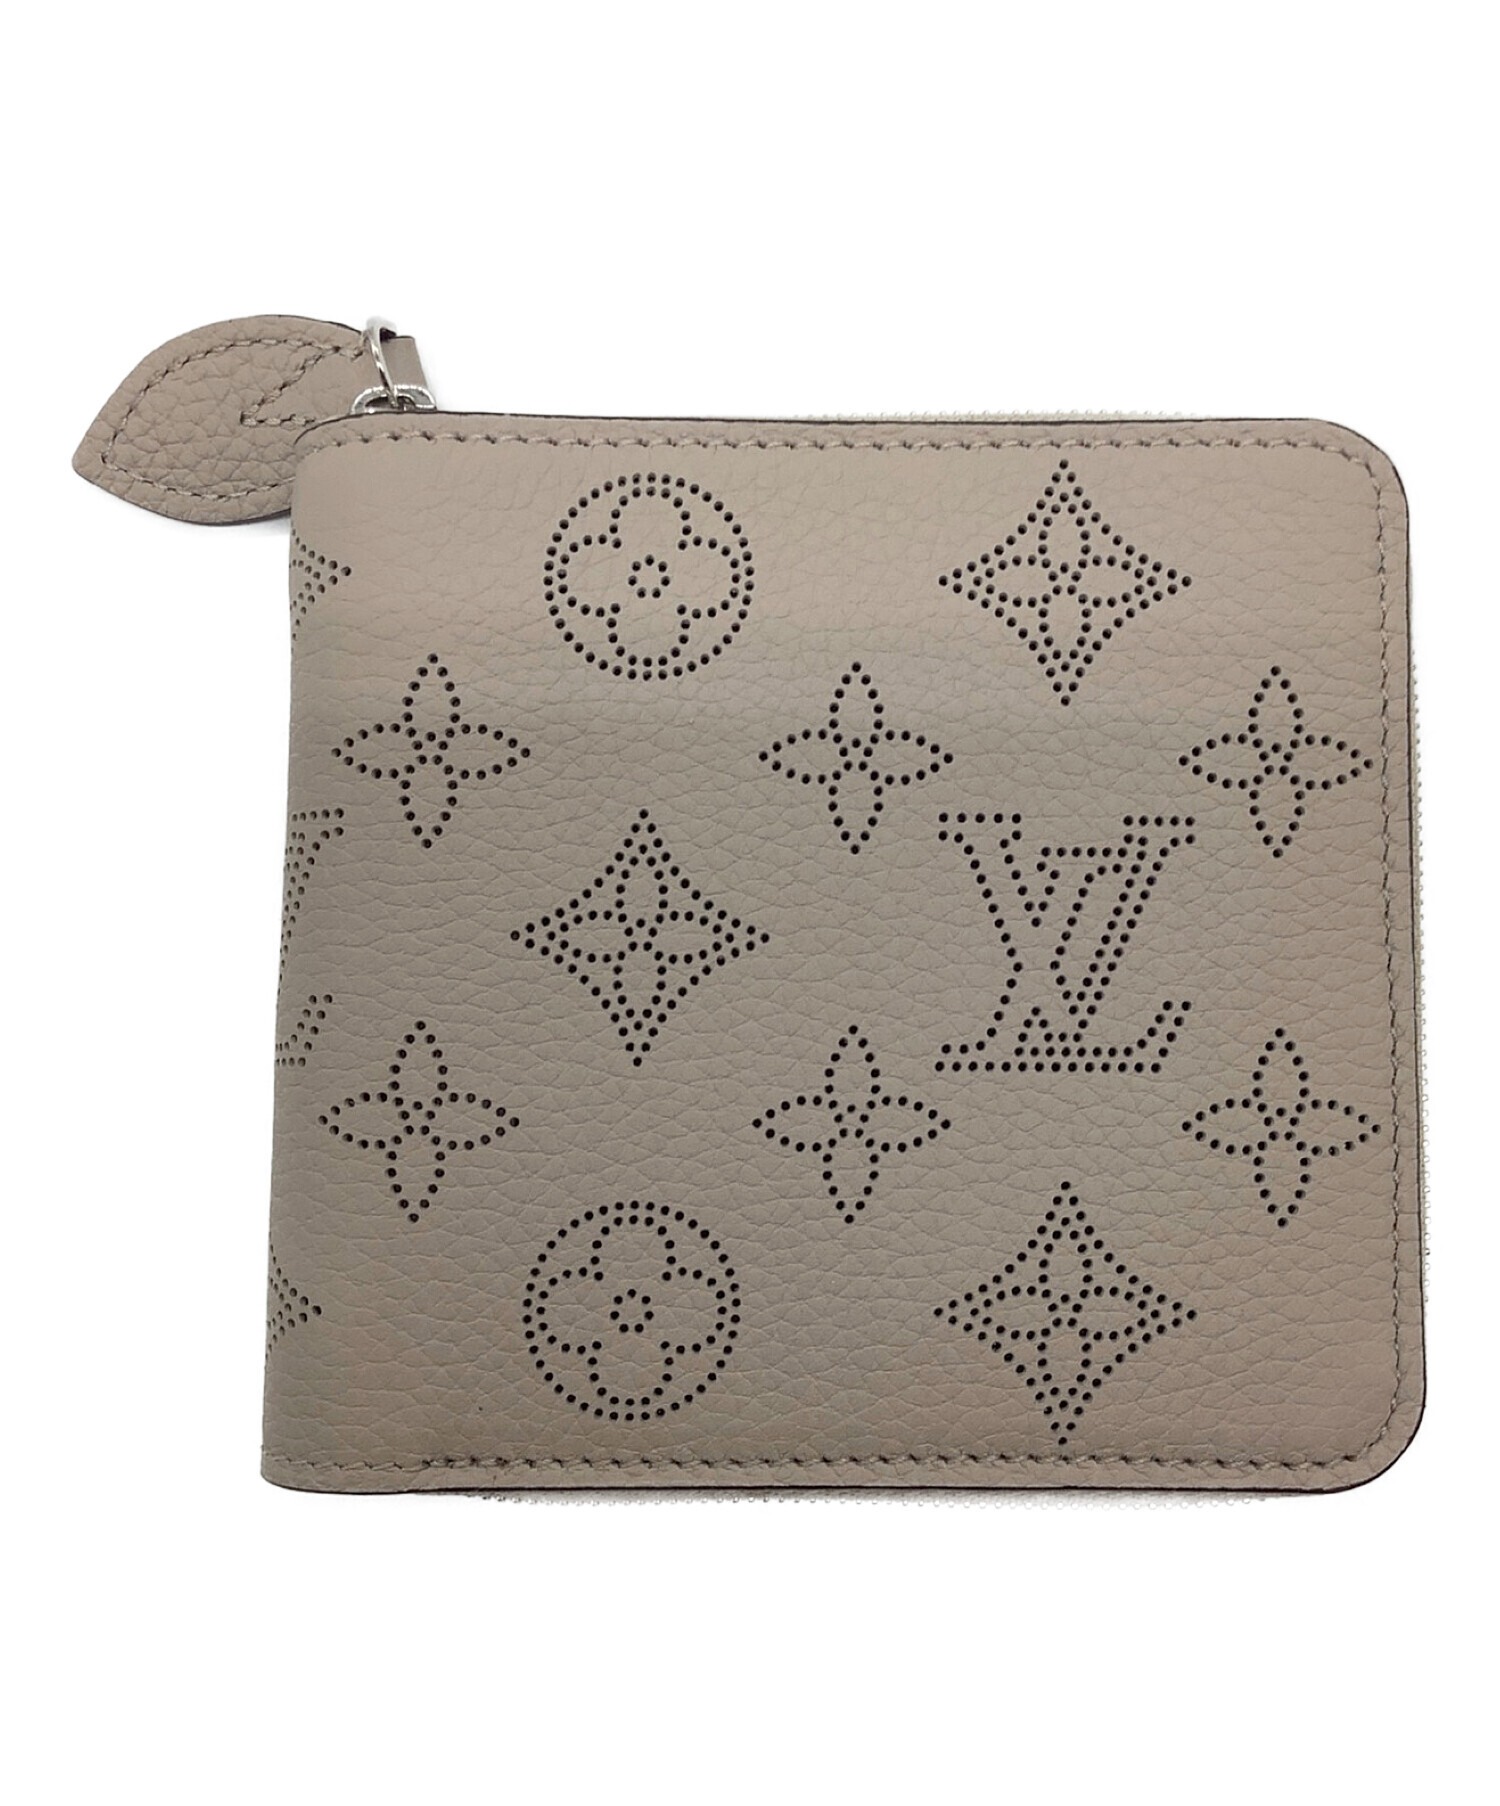 louis vuitton コンパクトウォレット ルイヴィトン | nate-hospital.com